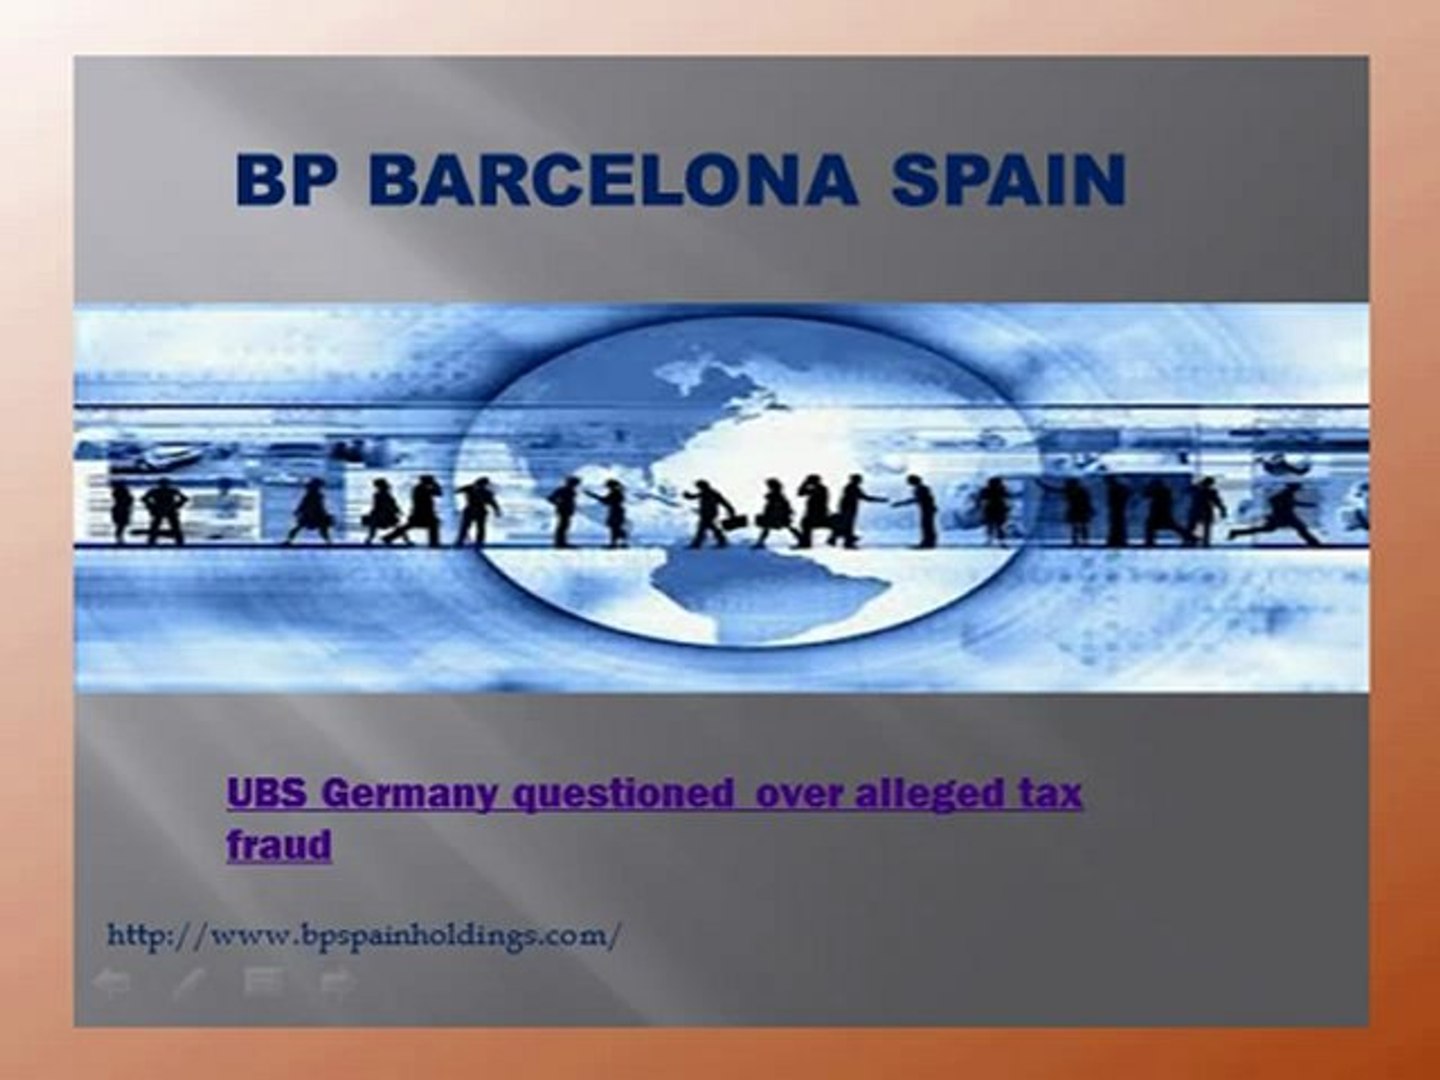 BP HOLDINGS BARCELONA AND MADRID SPAIN: UBS Germany